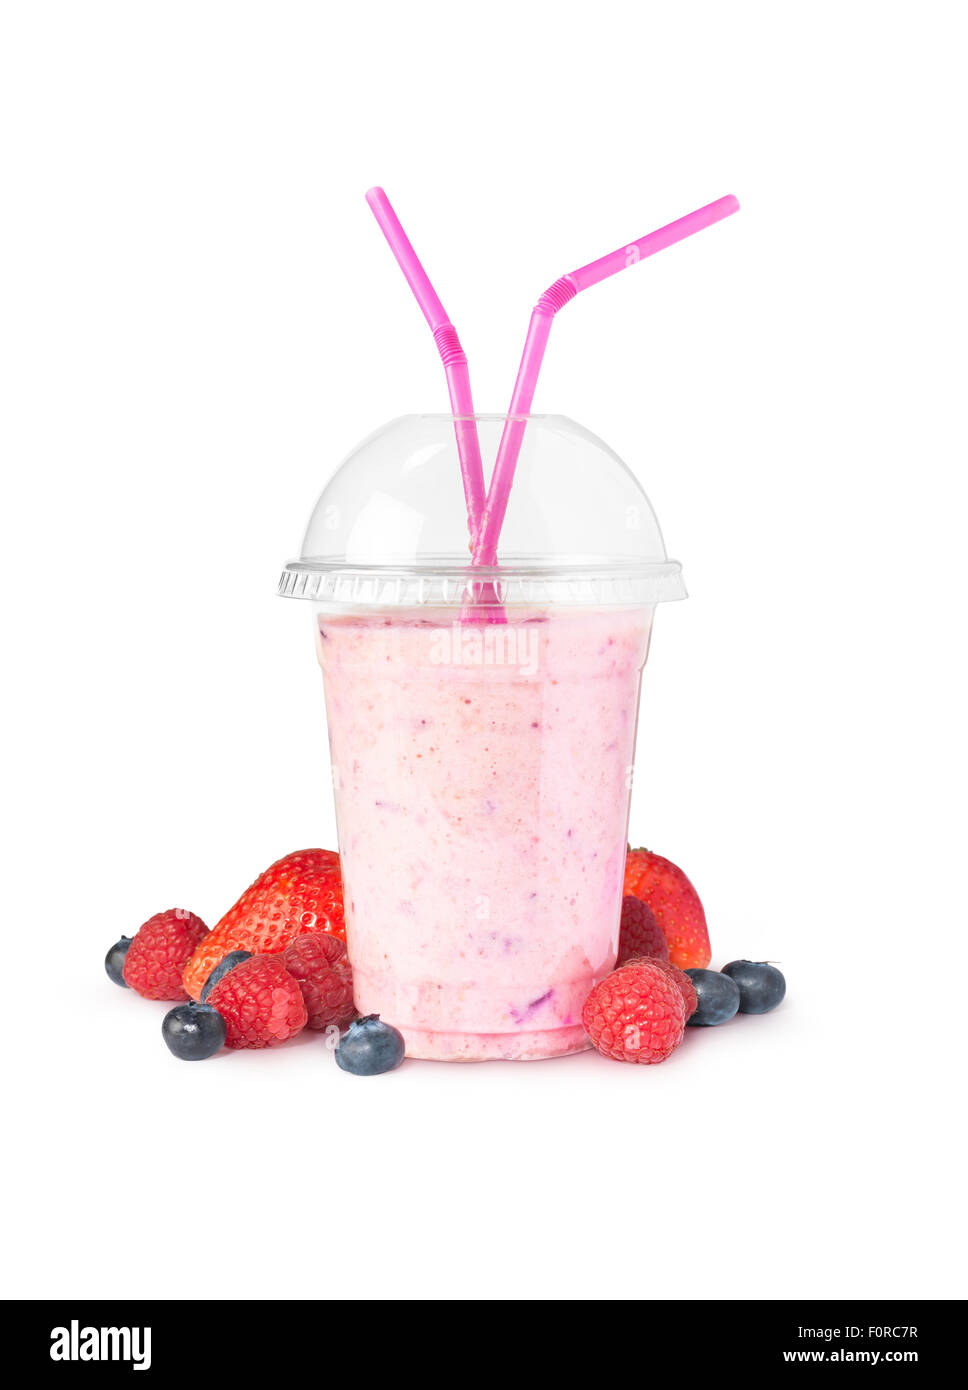 https://c8.alamy.com/comp/F0RC7R/shot-of-a-plastic-smoothie-cup-isolated-on-a-white-background-with-F0RC7R.jpg